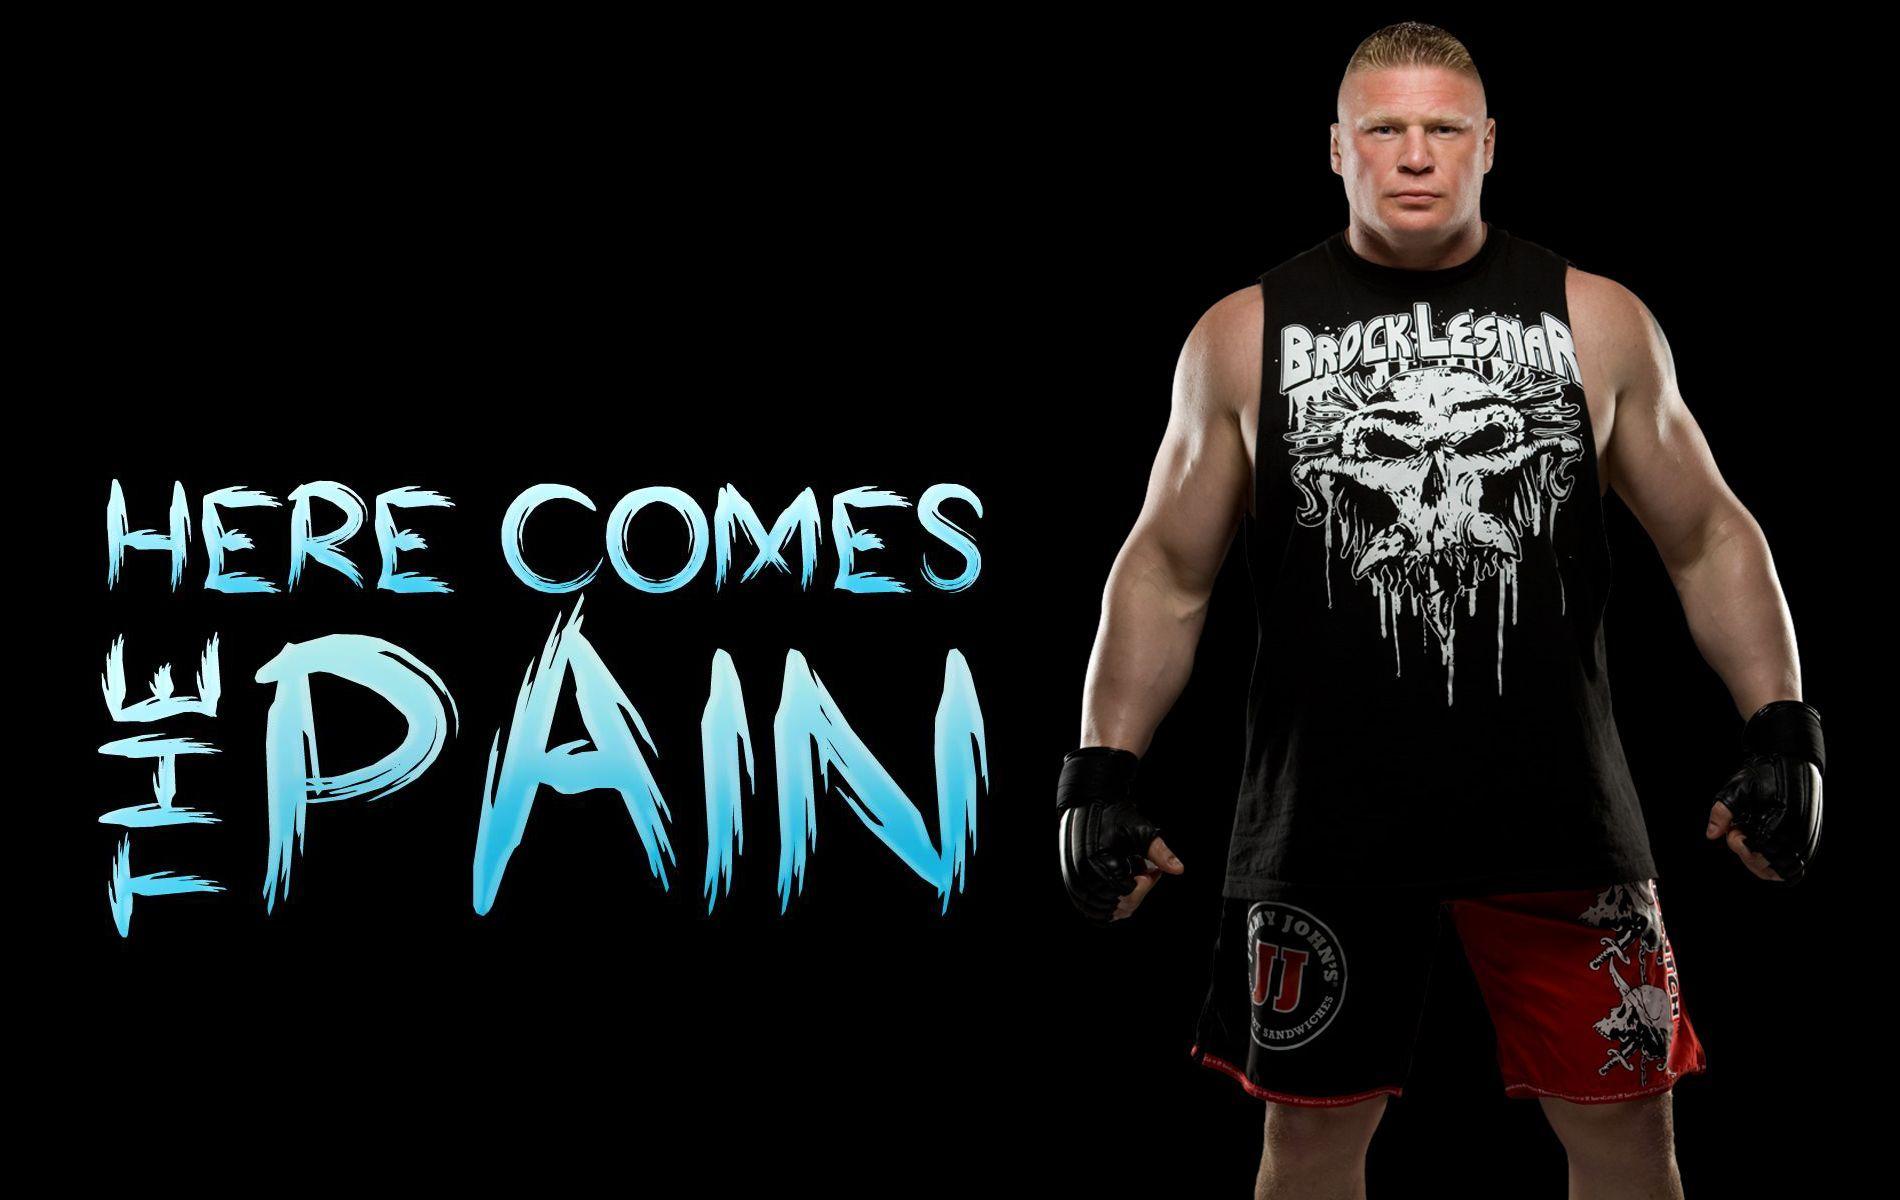 Brock Lesnar HD Background Wallpaper Background of Your